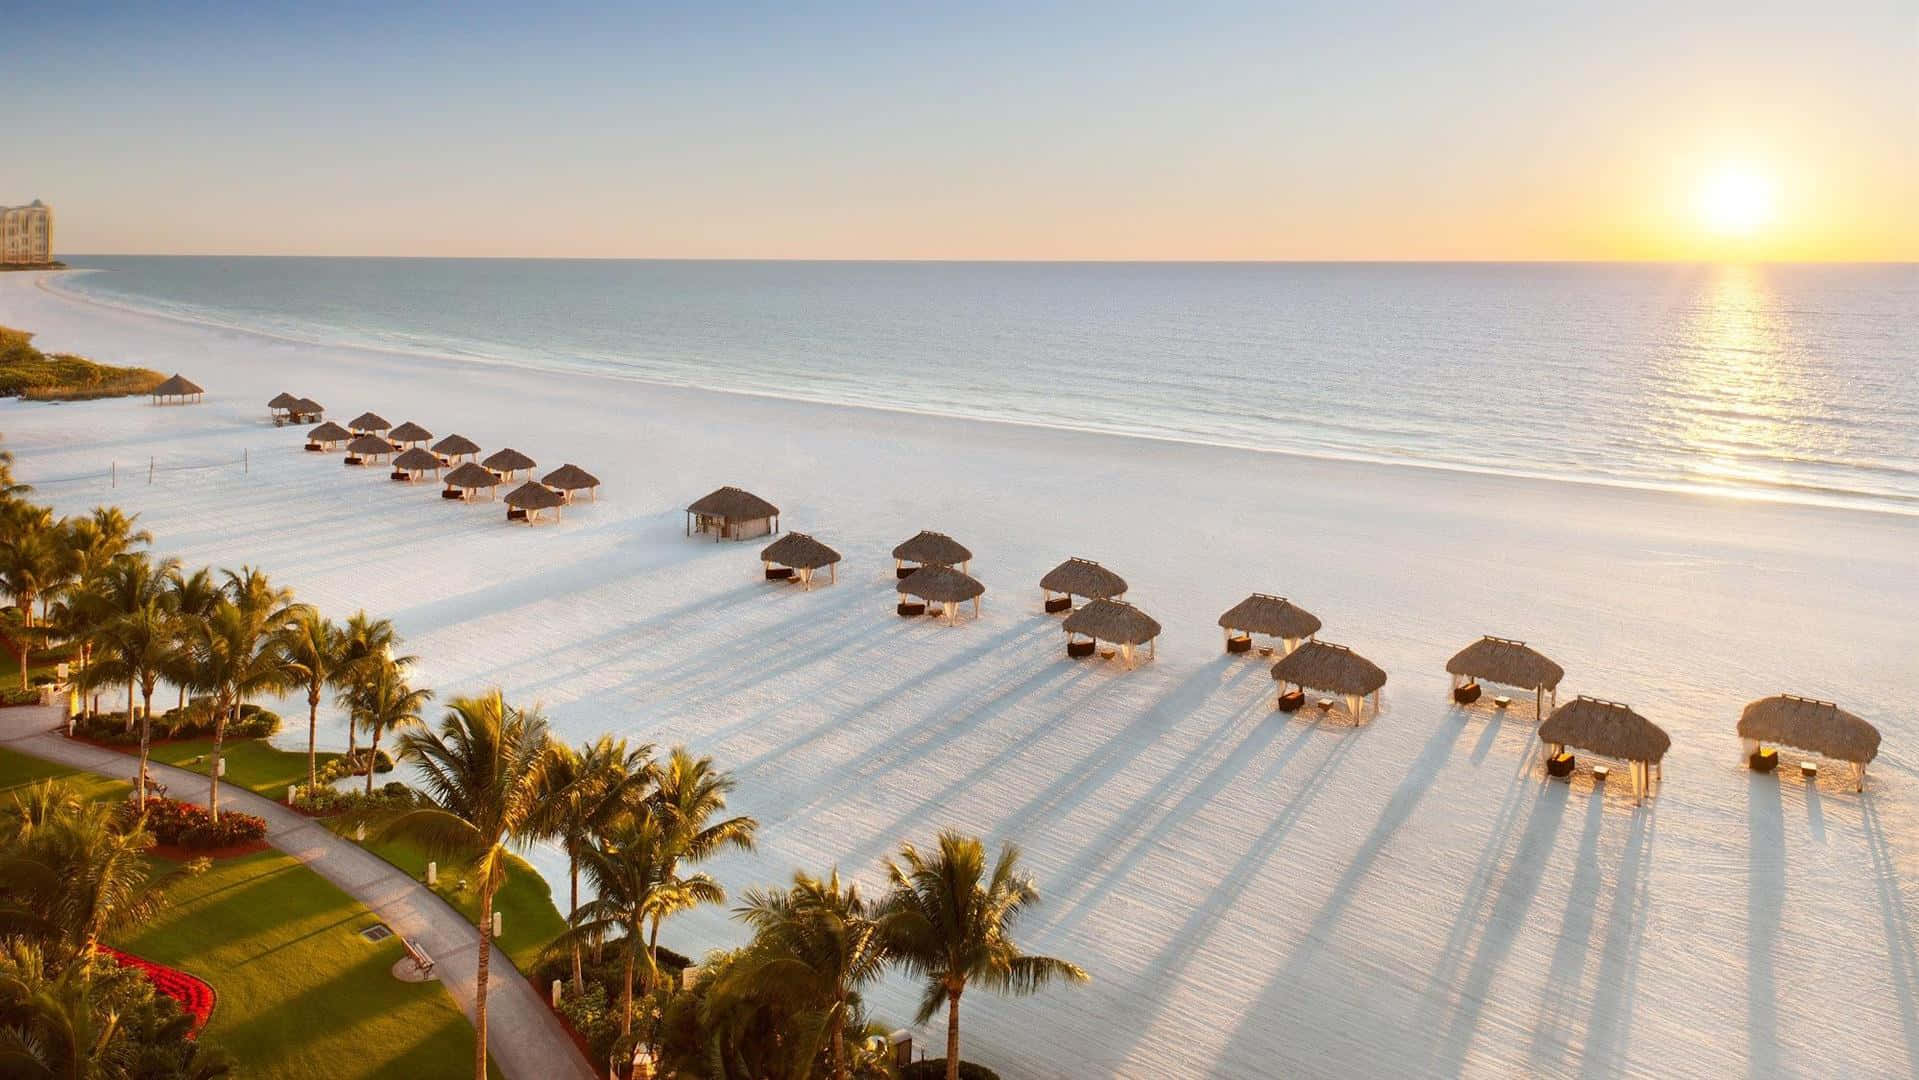 Marco Island, Florida - A Vibrant Paradise of Sun-Drenched Beaches and Turquoise Waters